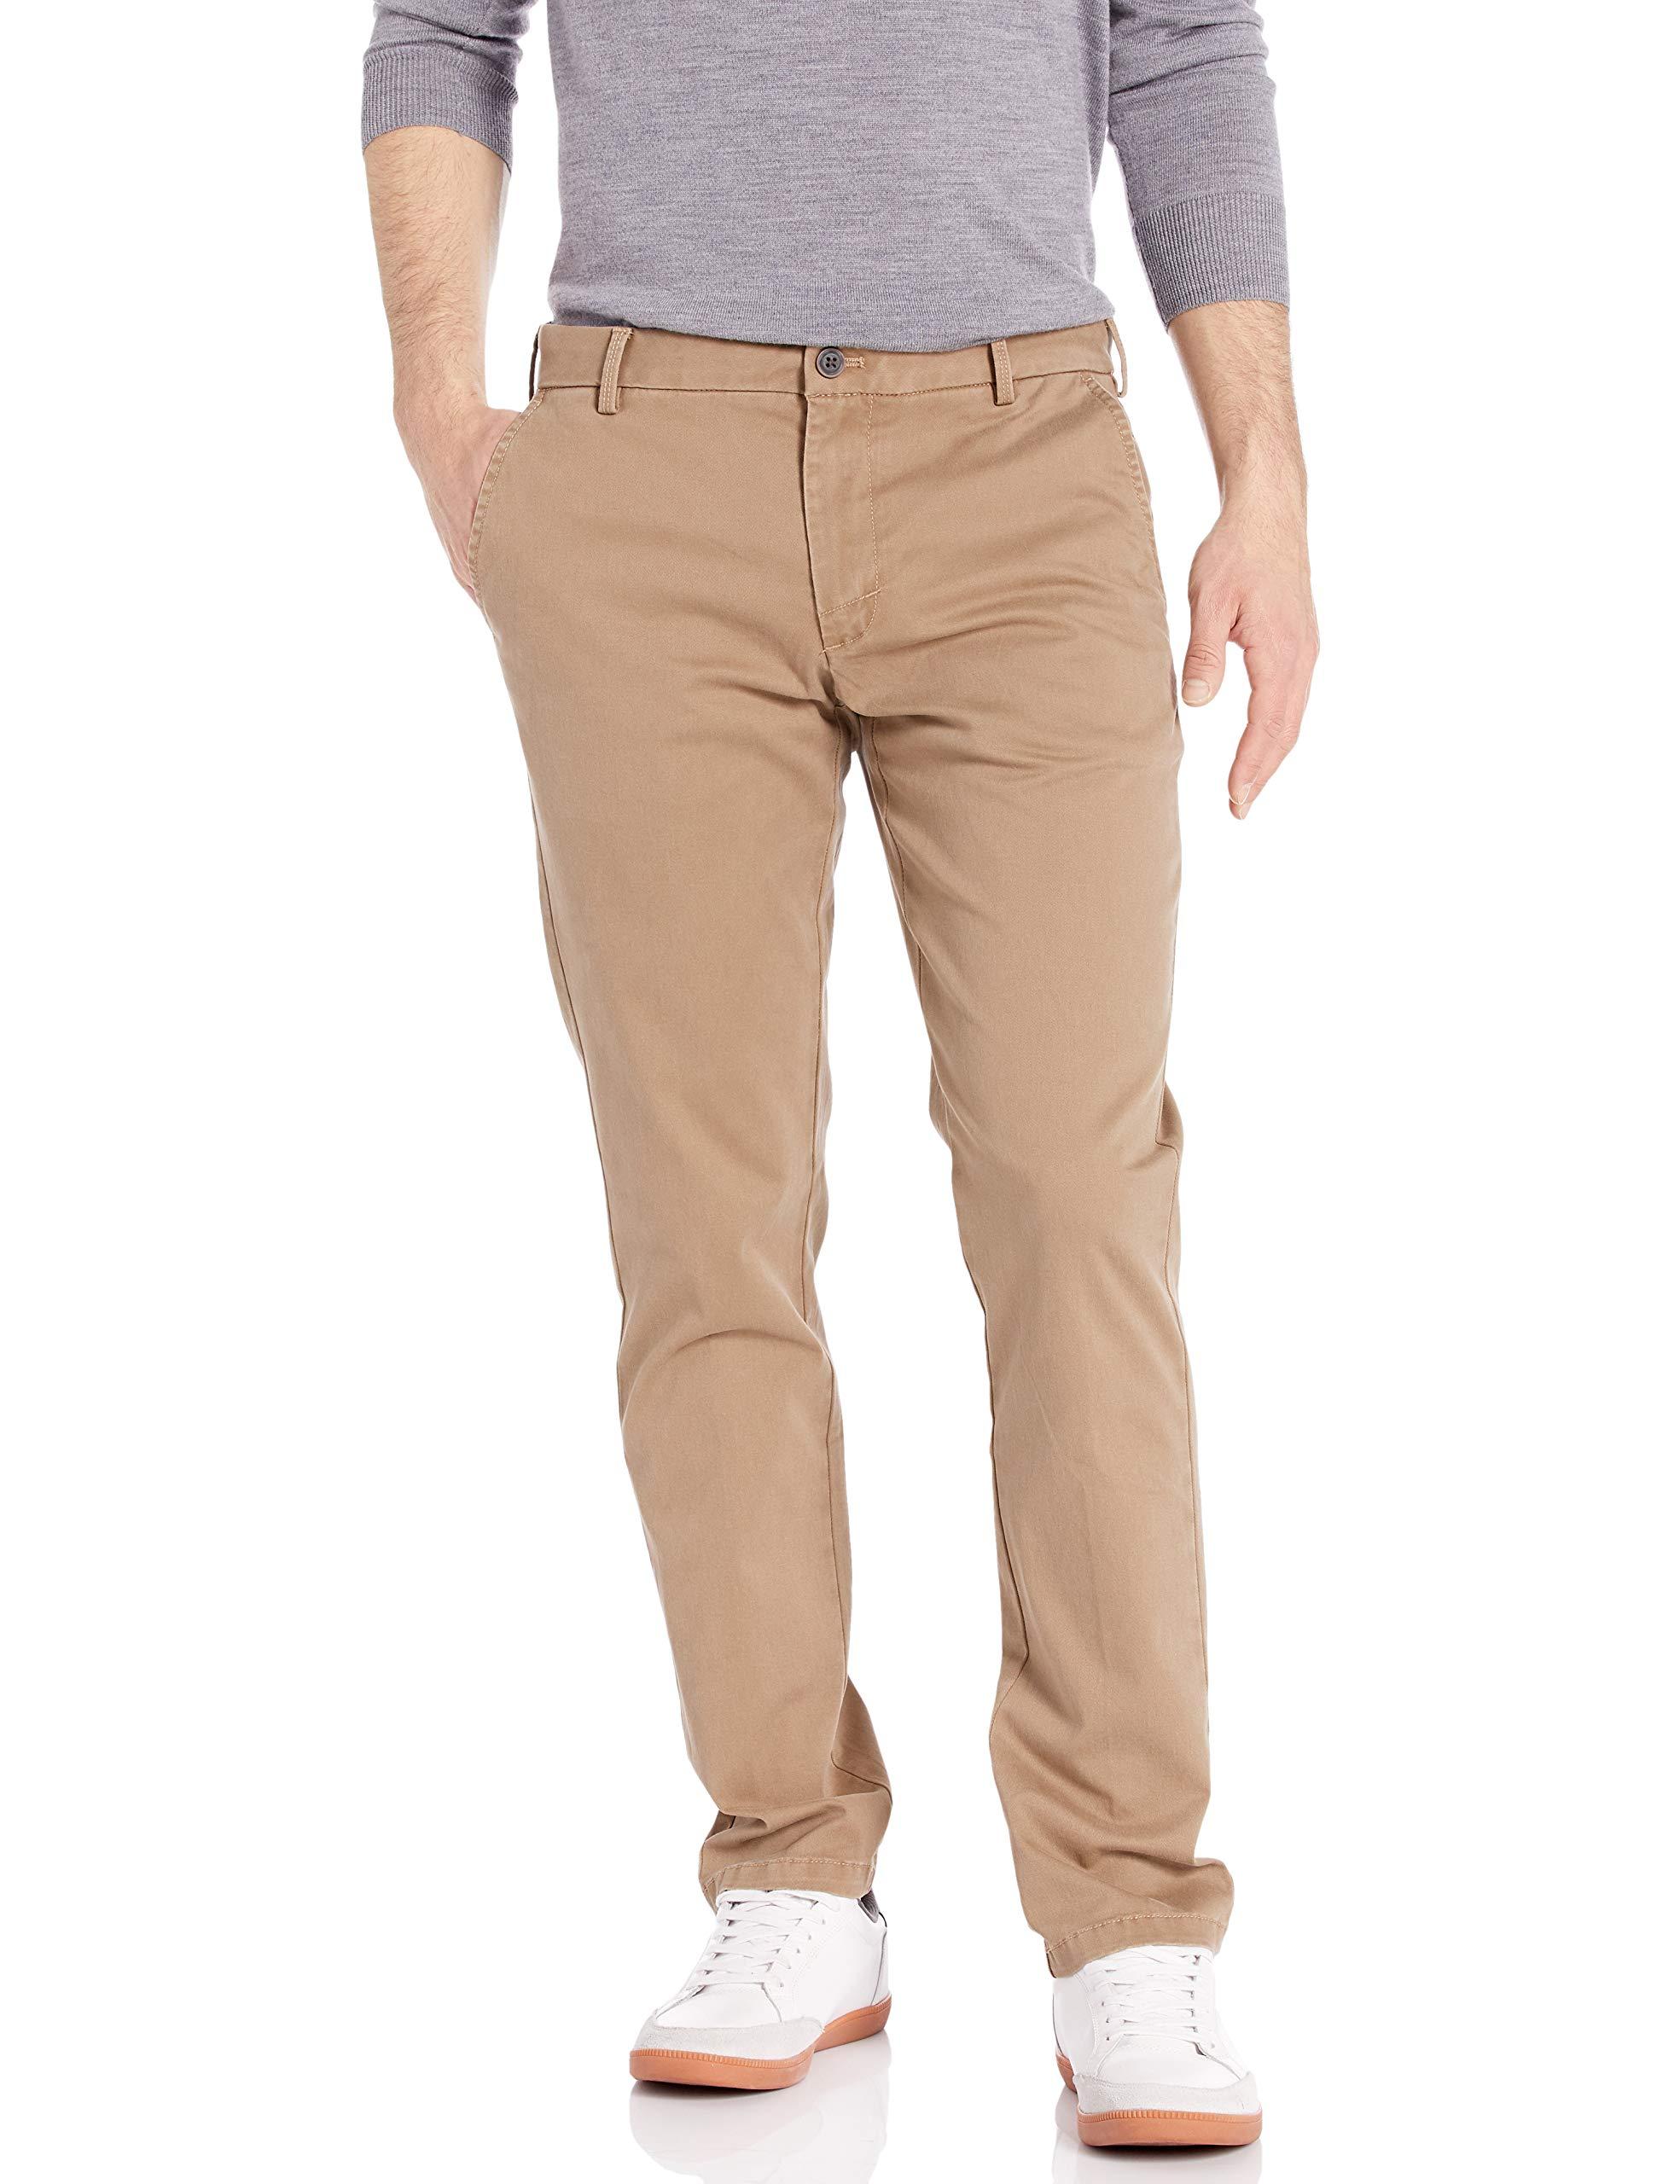 Izod Saltwater Stretch Flat Front Slim Fit Chino Pant in Natural for ...